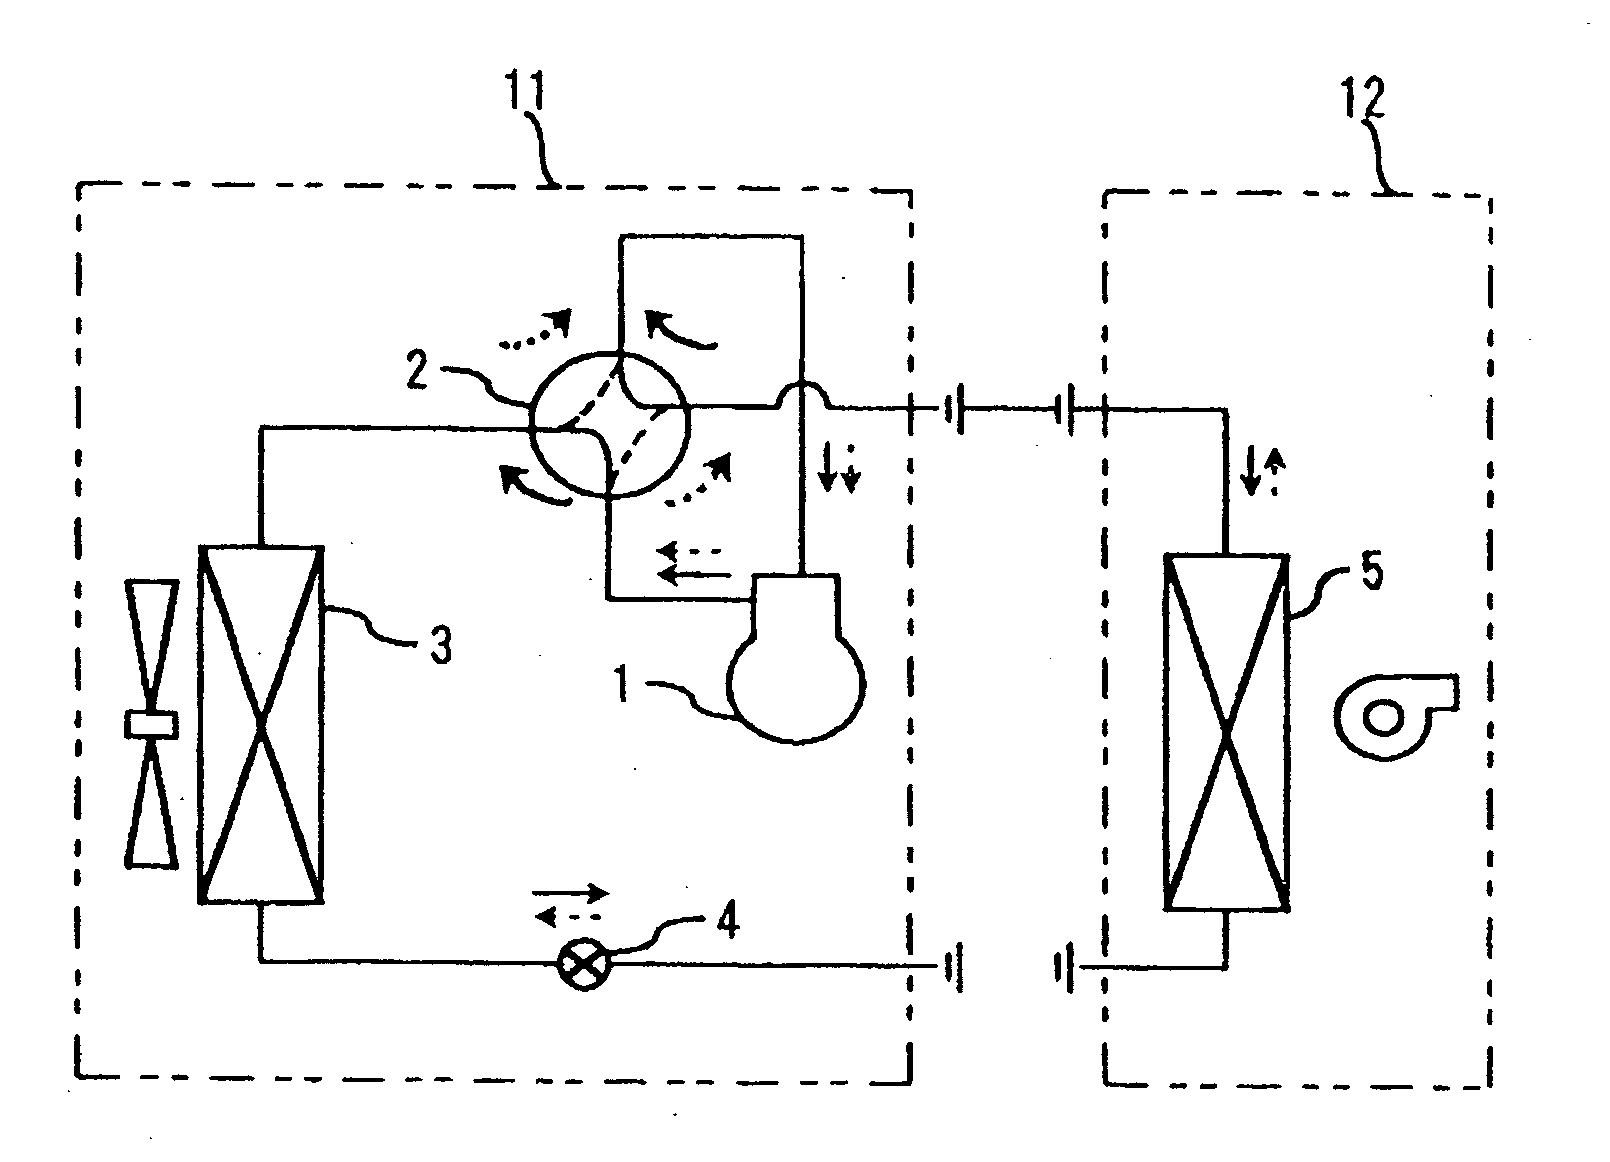 Heat exchanger for air and freezer device